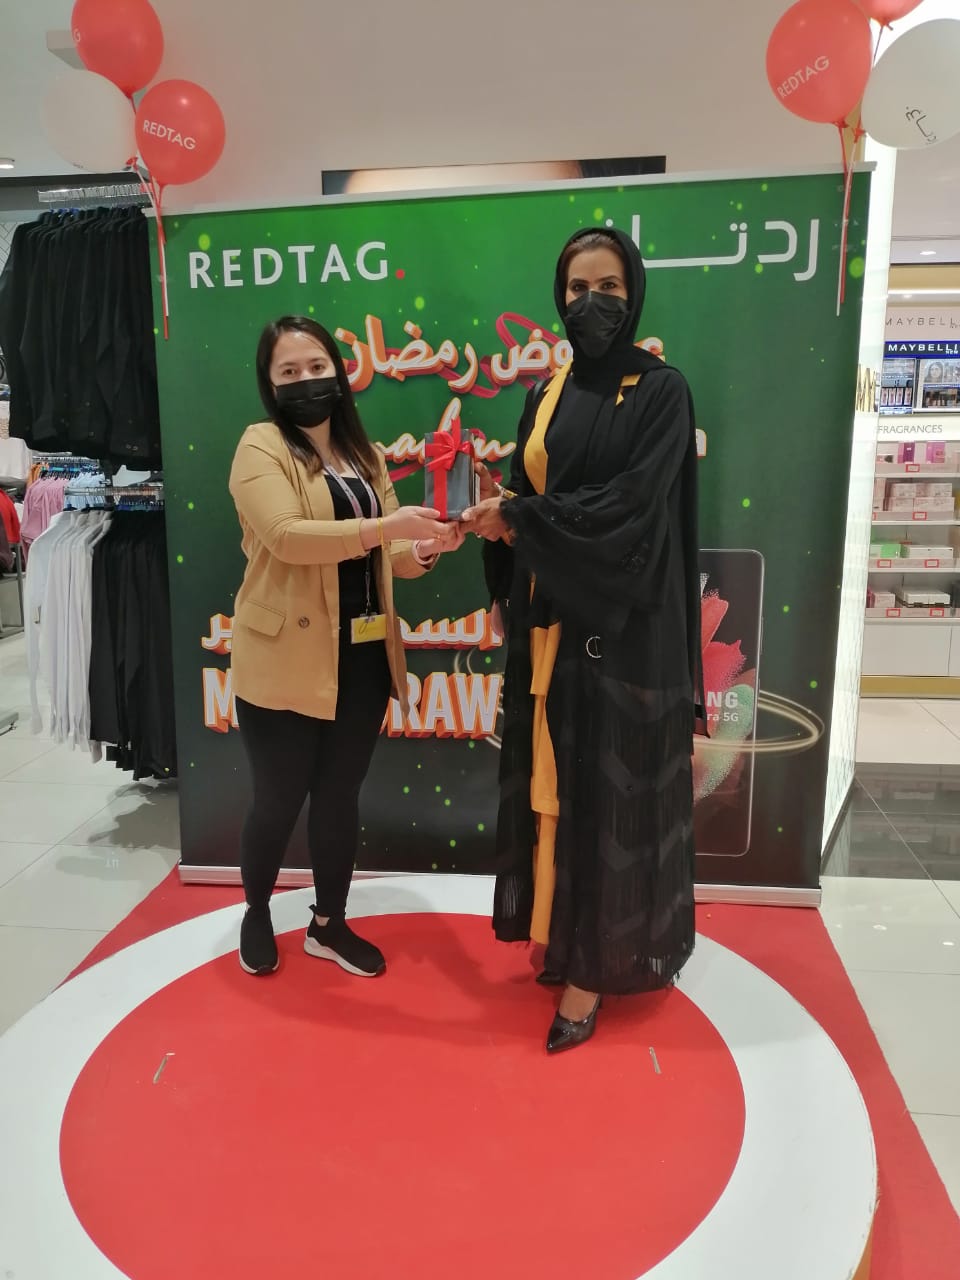 REDTAG Announces Winners Of Ramadan Bonanza raffle, Almost 600 Lucky Shoppers Receive Top-End Samsung Galaxy S21 Ultra 5G Smartphones Worth AED 3 million In Prize Value